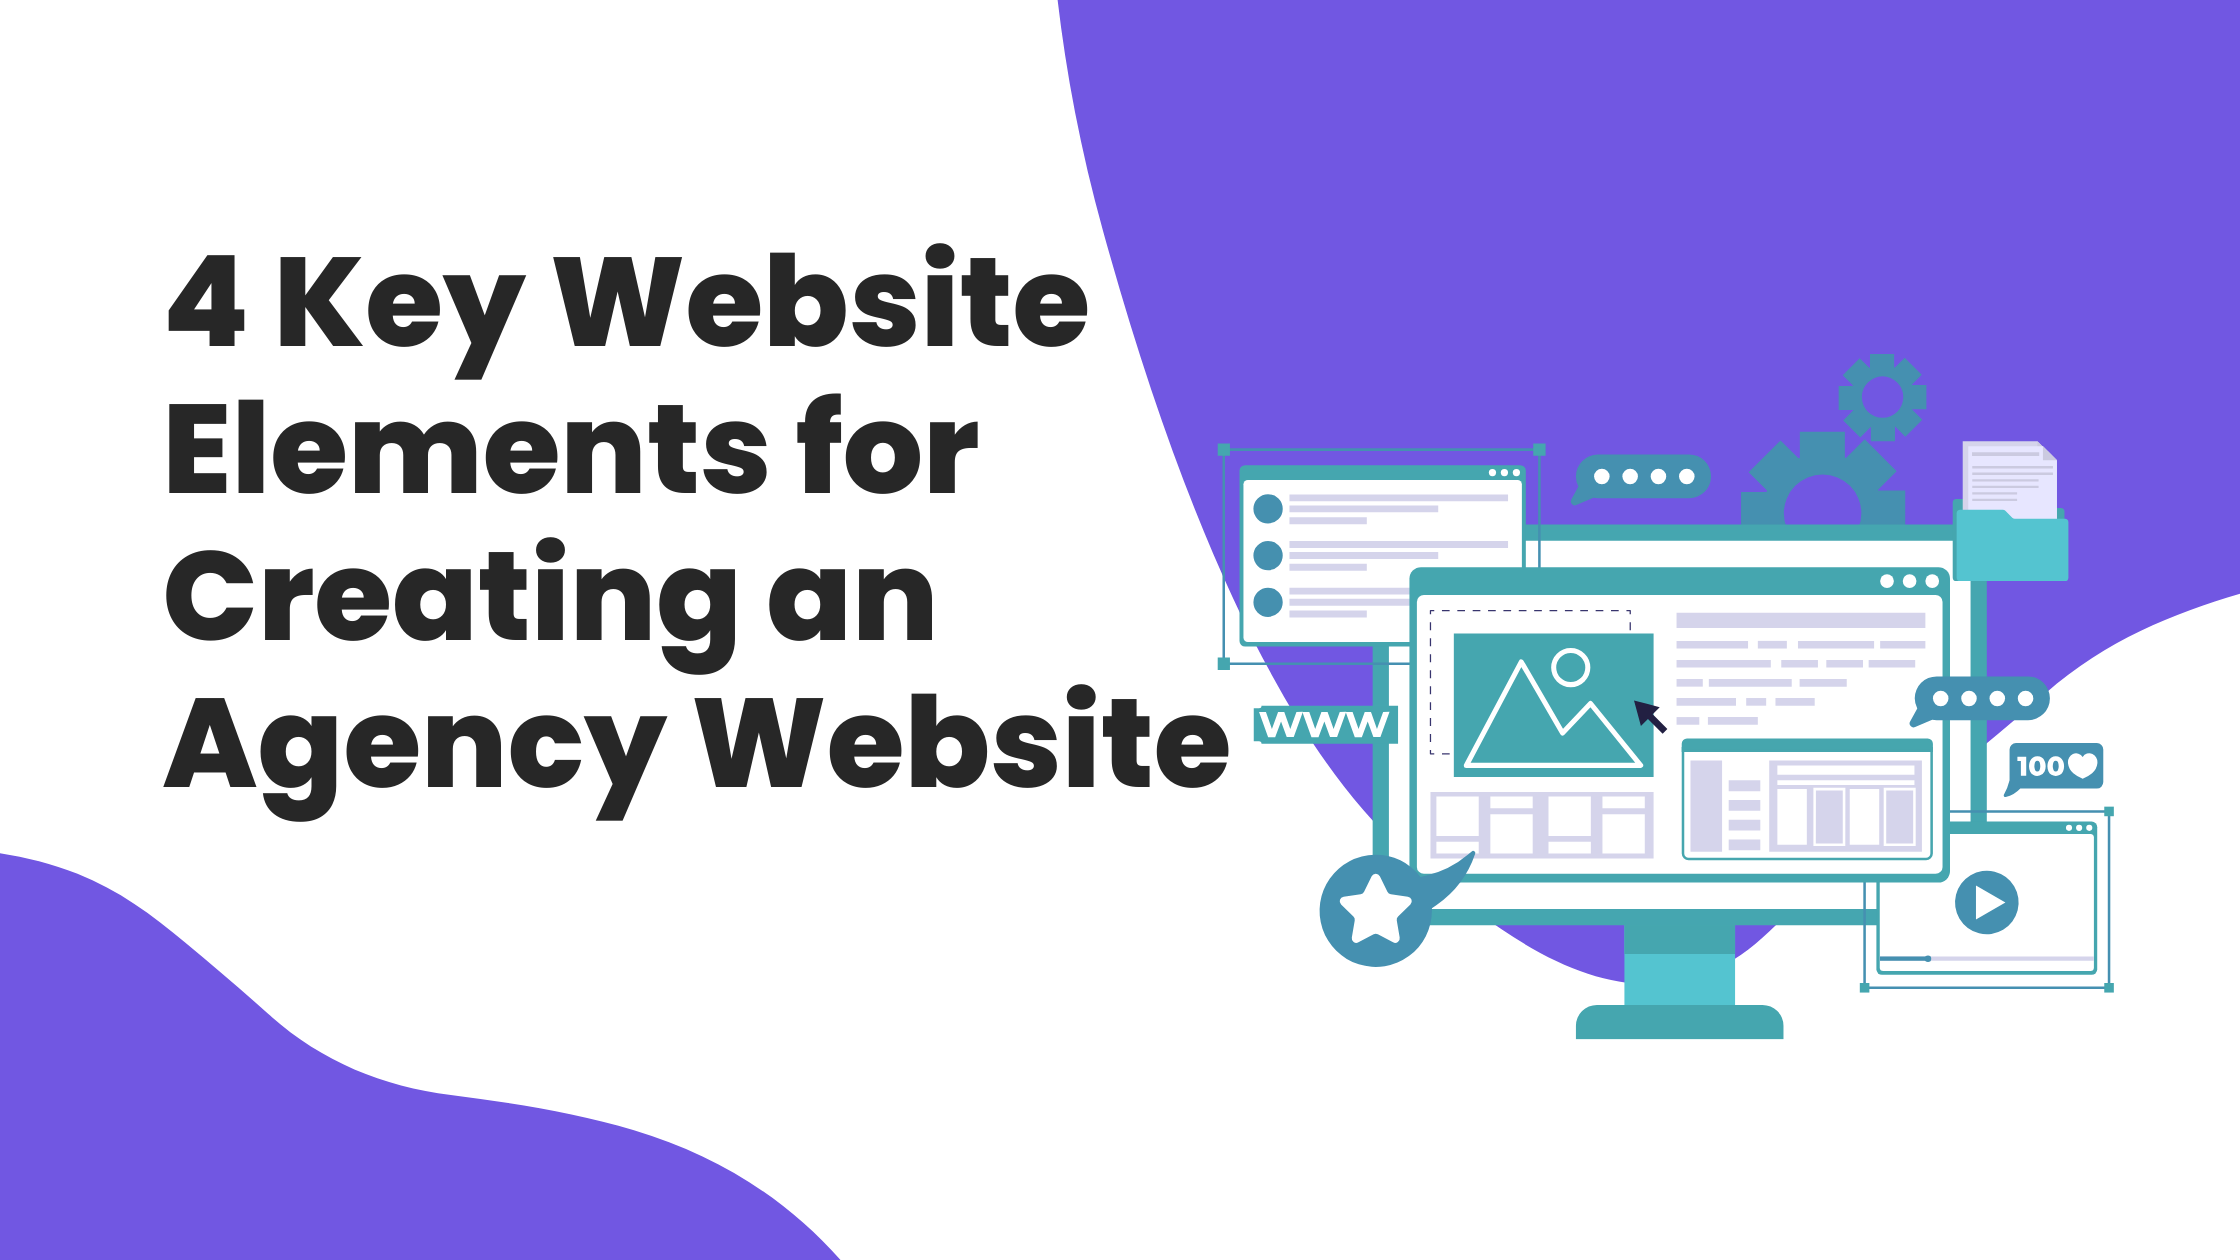 4 Key Website Elements for Creating an Agency Website